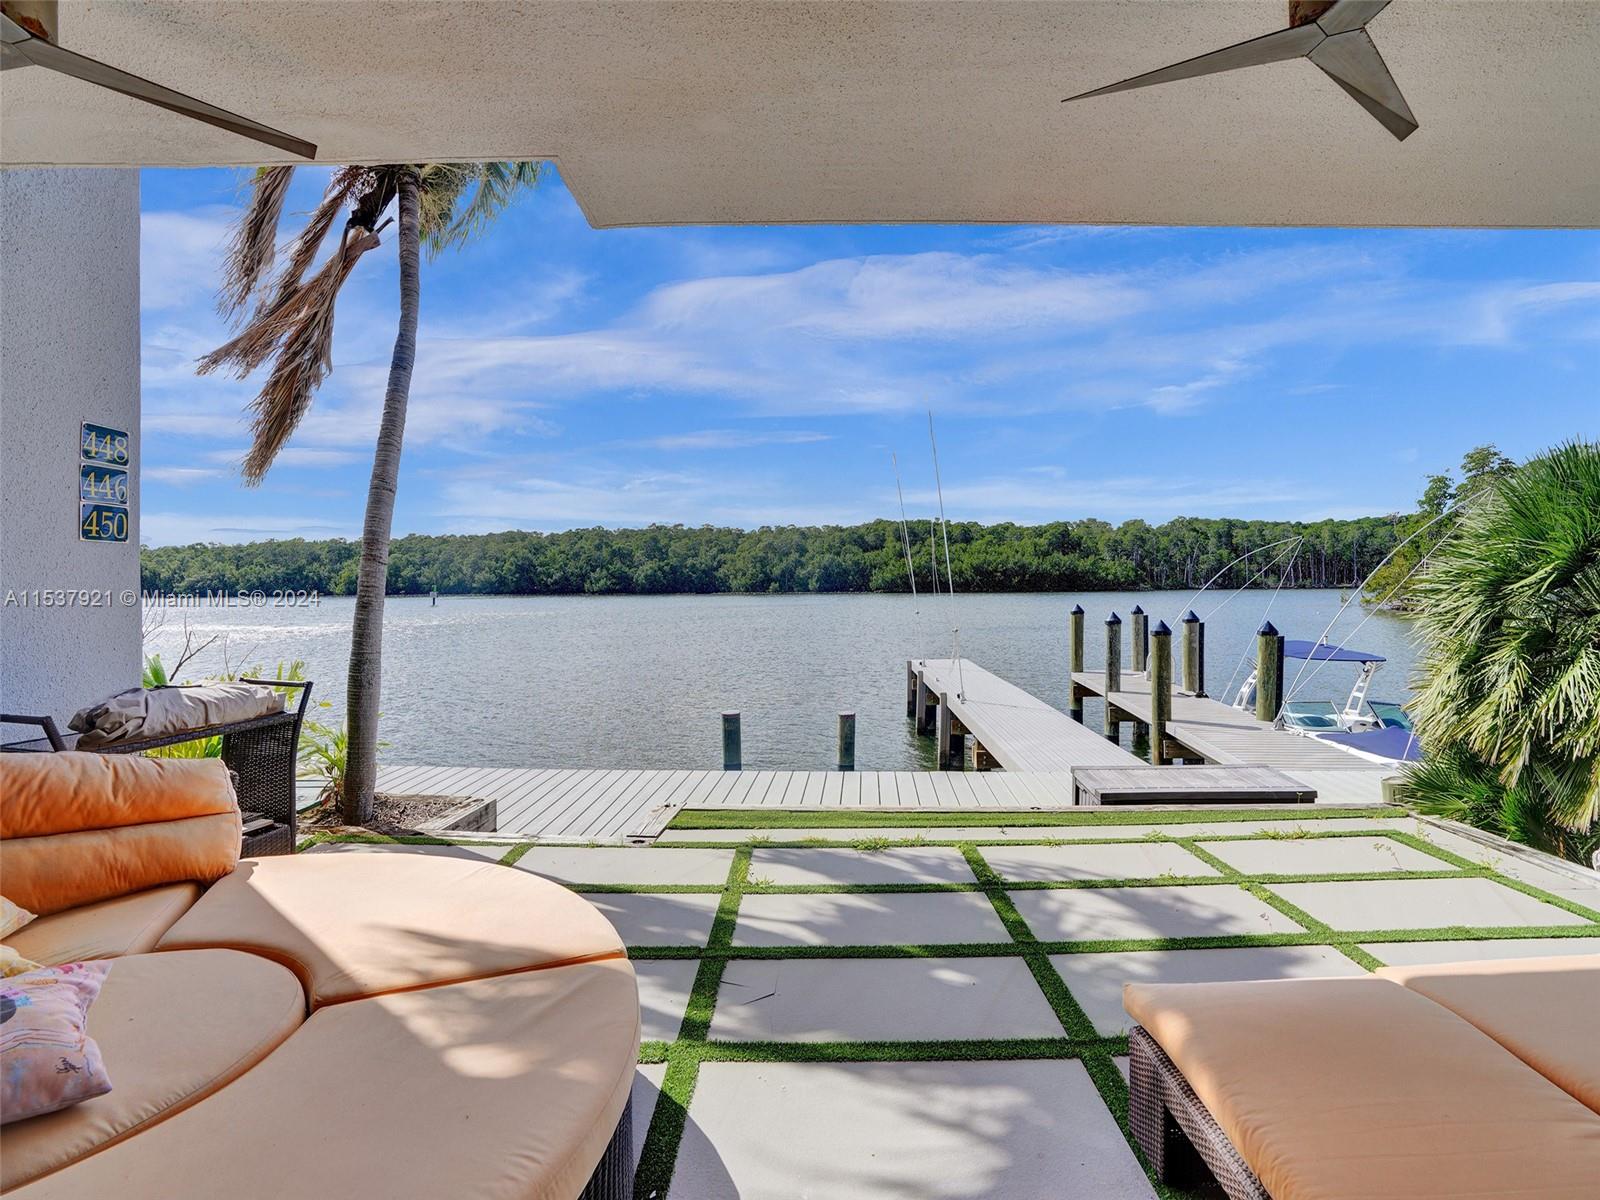 Poinciana island Stunning duplex 3 bedrooms 4 bathroom fully renovated with open bay views and two boat docks! This beautiful home is located inside the prestigious community of poinciana island with 6 tennis courts, a pool house, a security gate and 24 hr service.